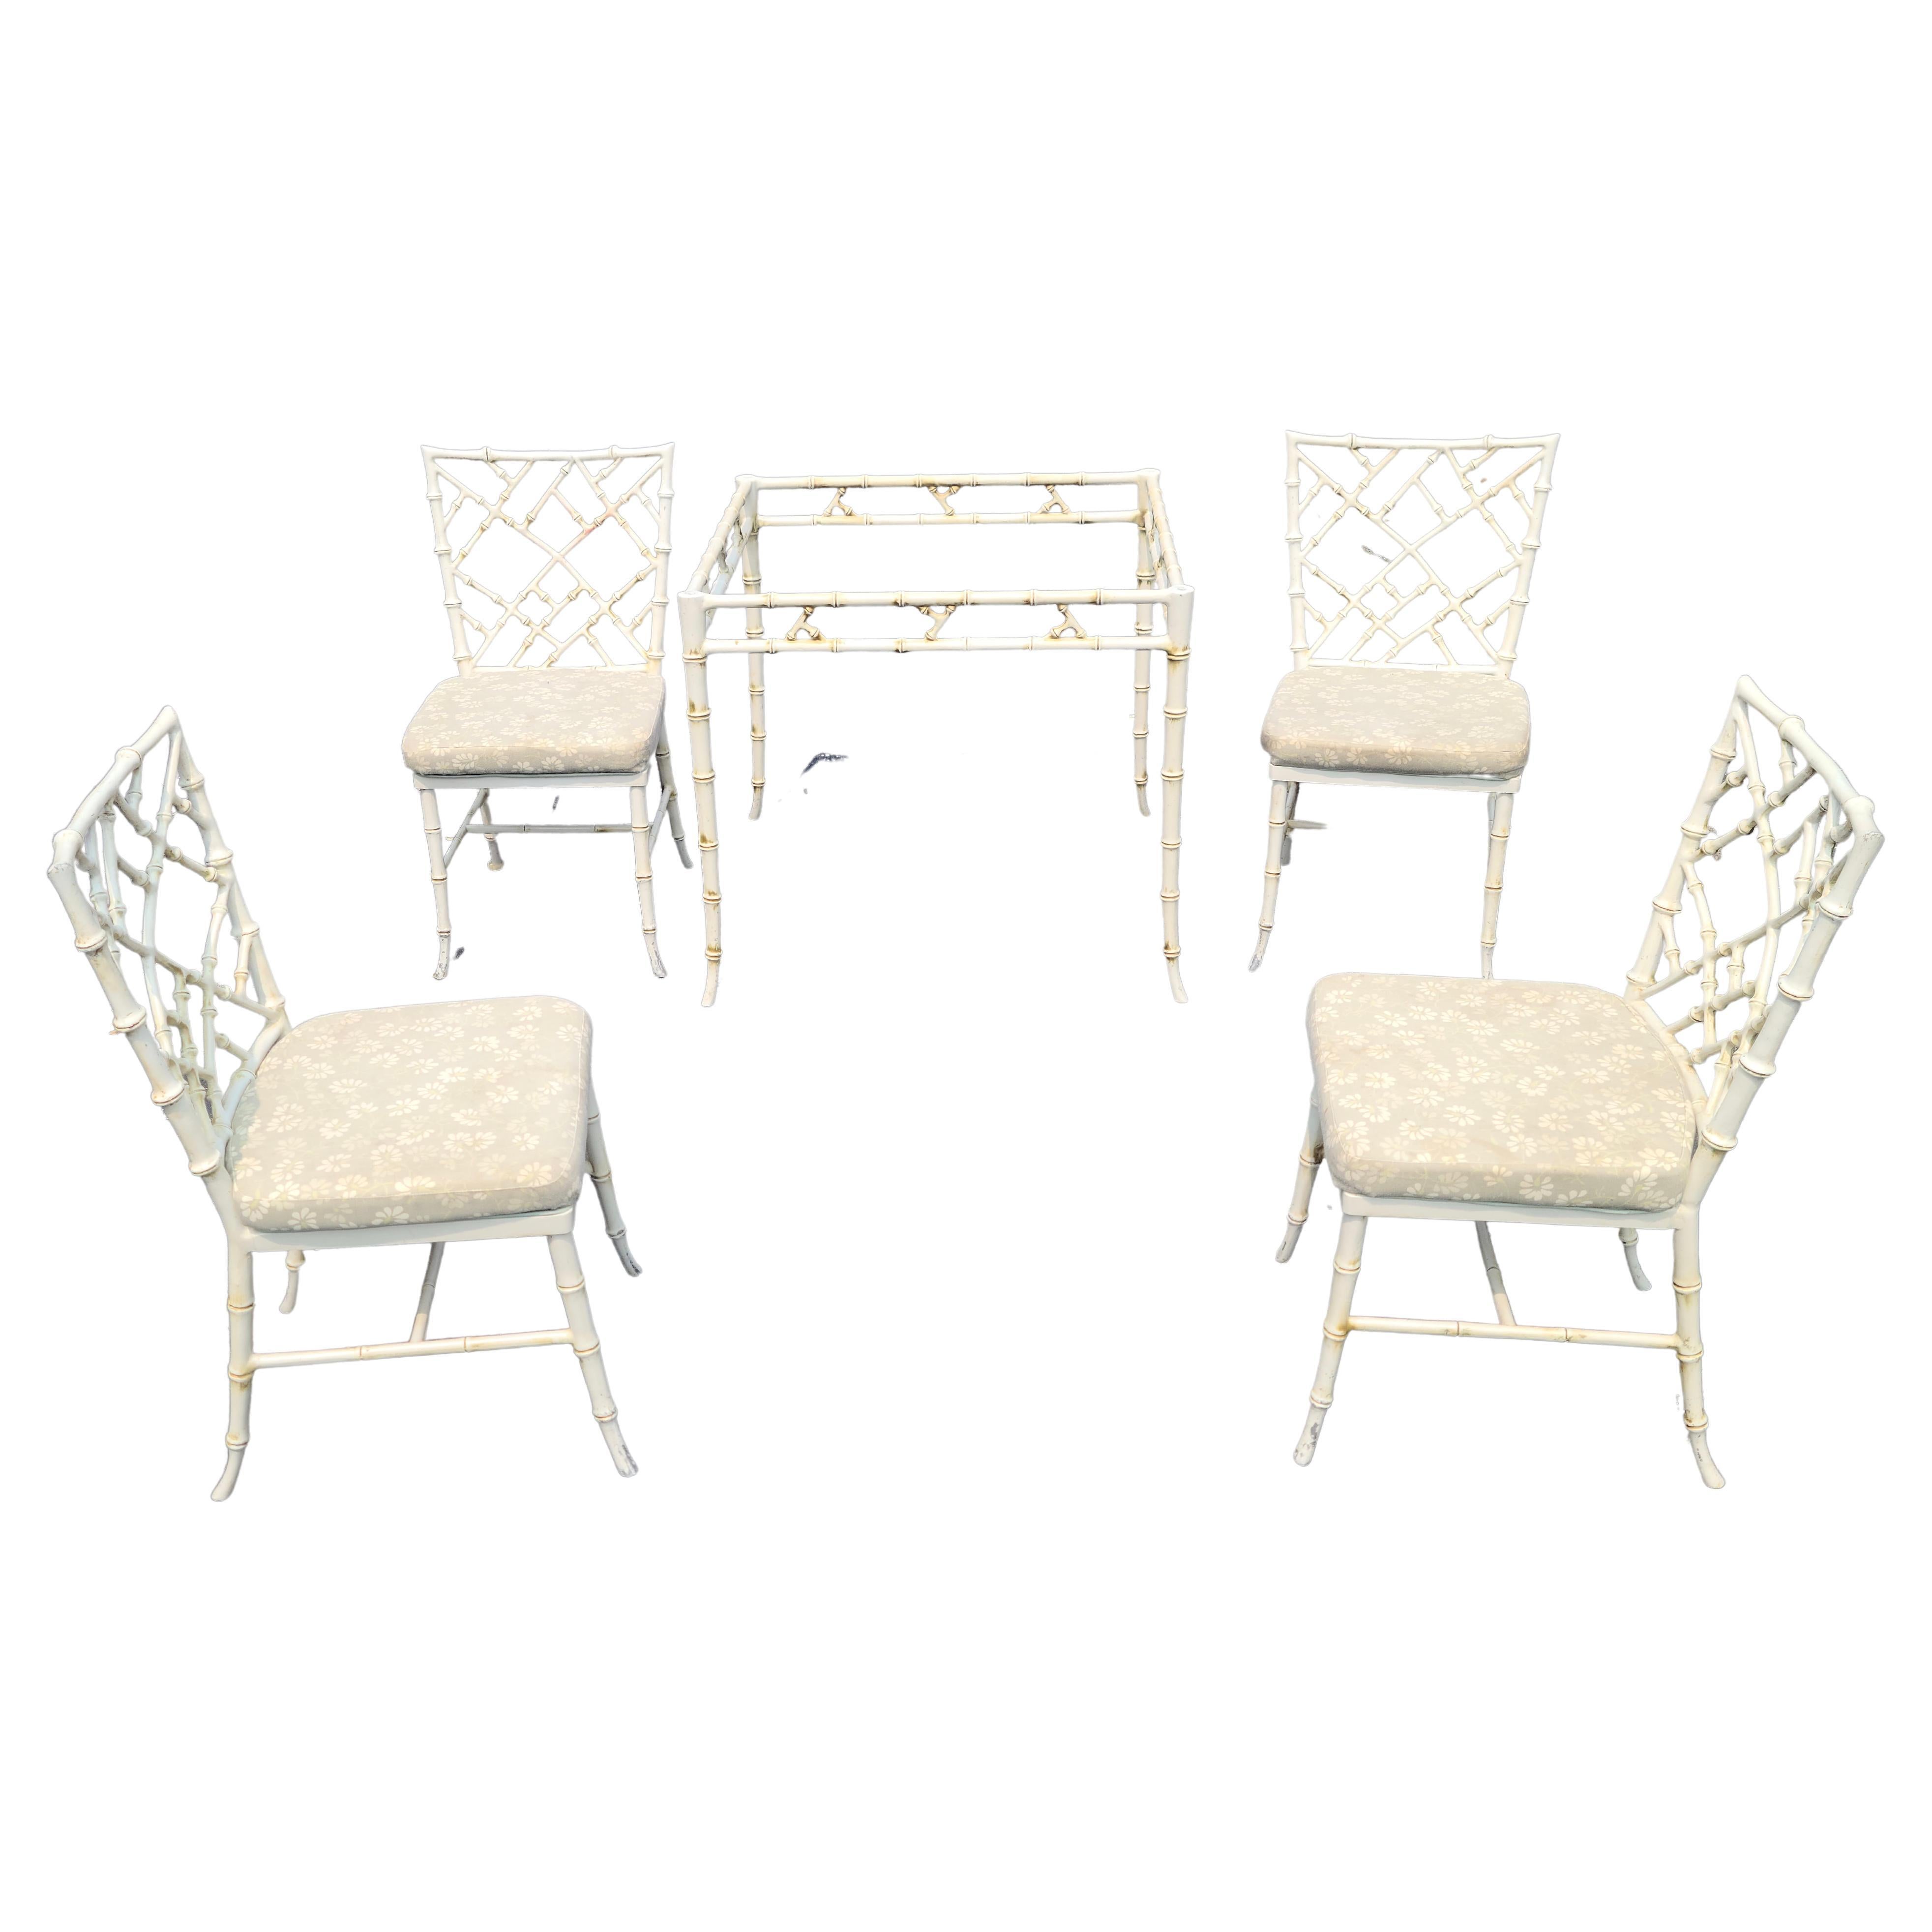 Please feel free to reach out for accurate shipping to your location.

No glass top for this set.

Table and four chairs by Phyllis Morris.
Bamboo theme cast in aluminum.